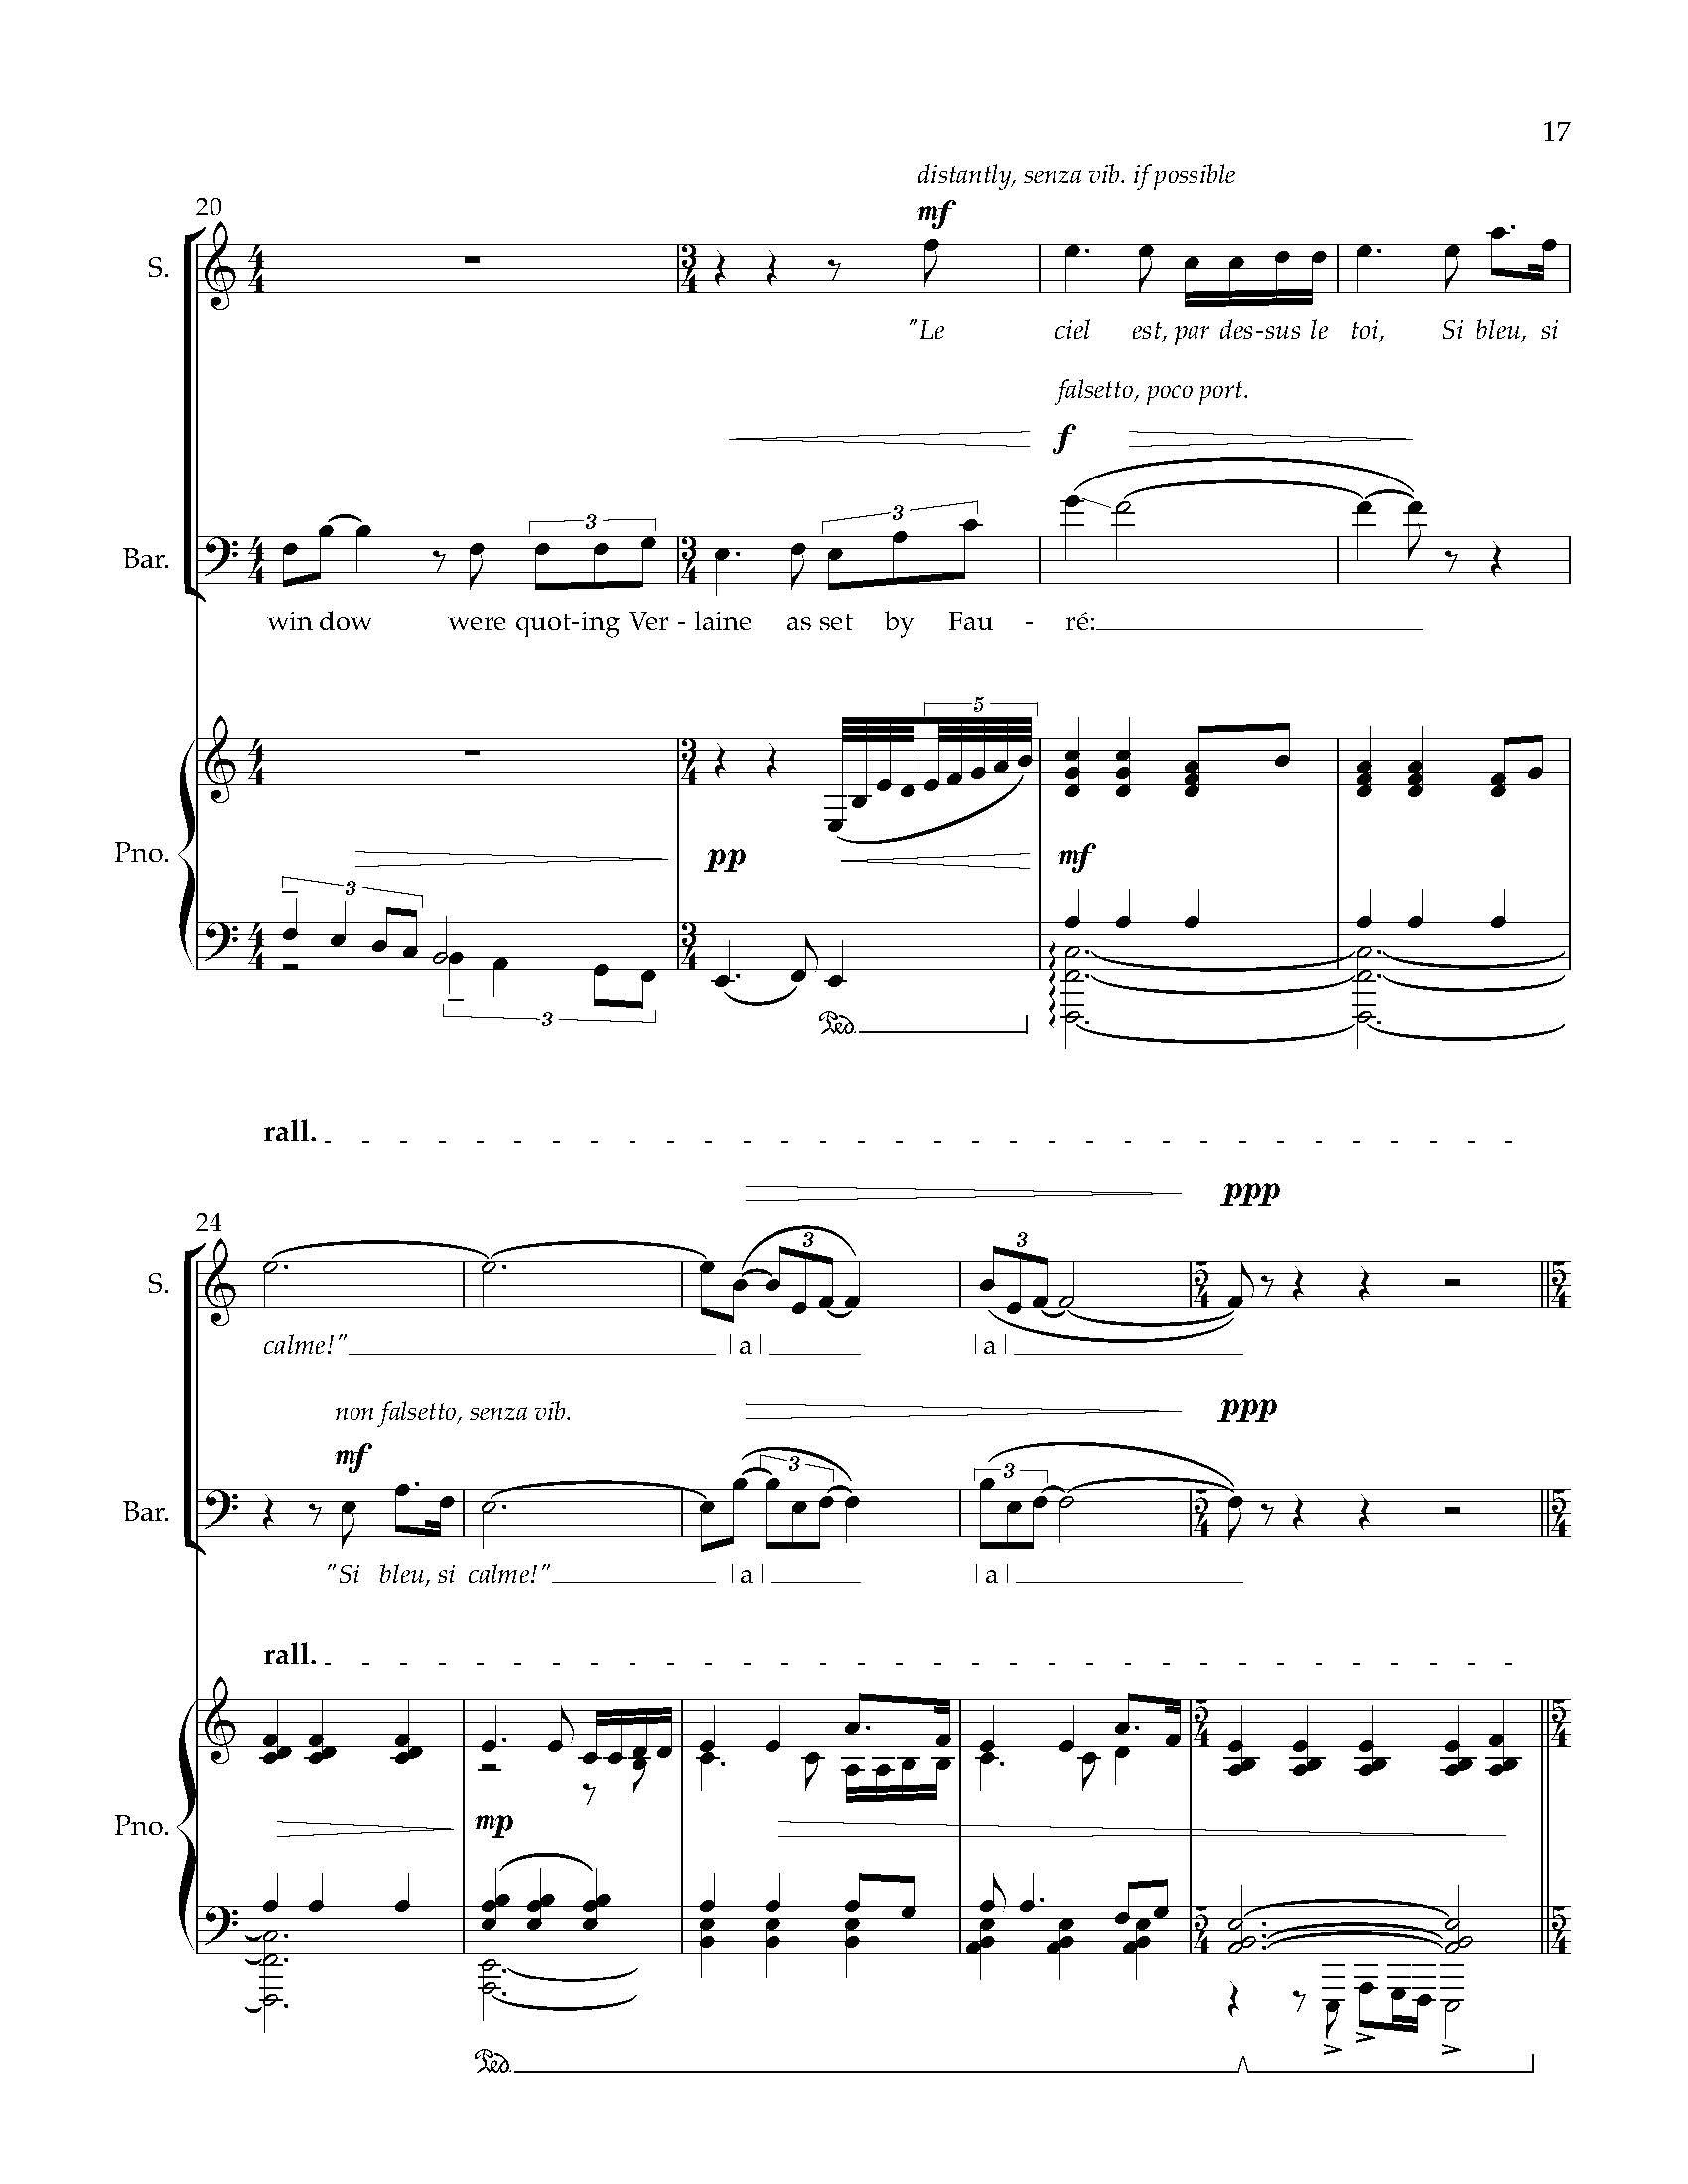 Sky - Complete Score (Revised)_Page_23.jpg